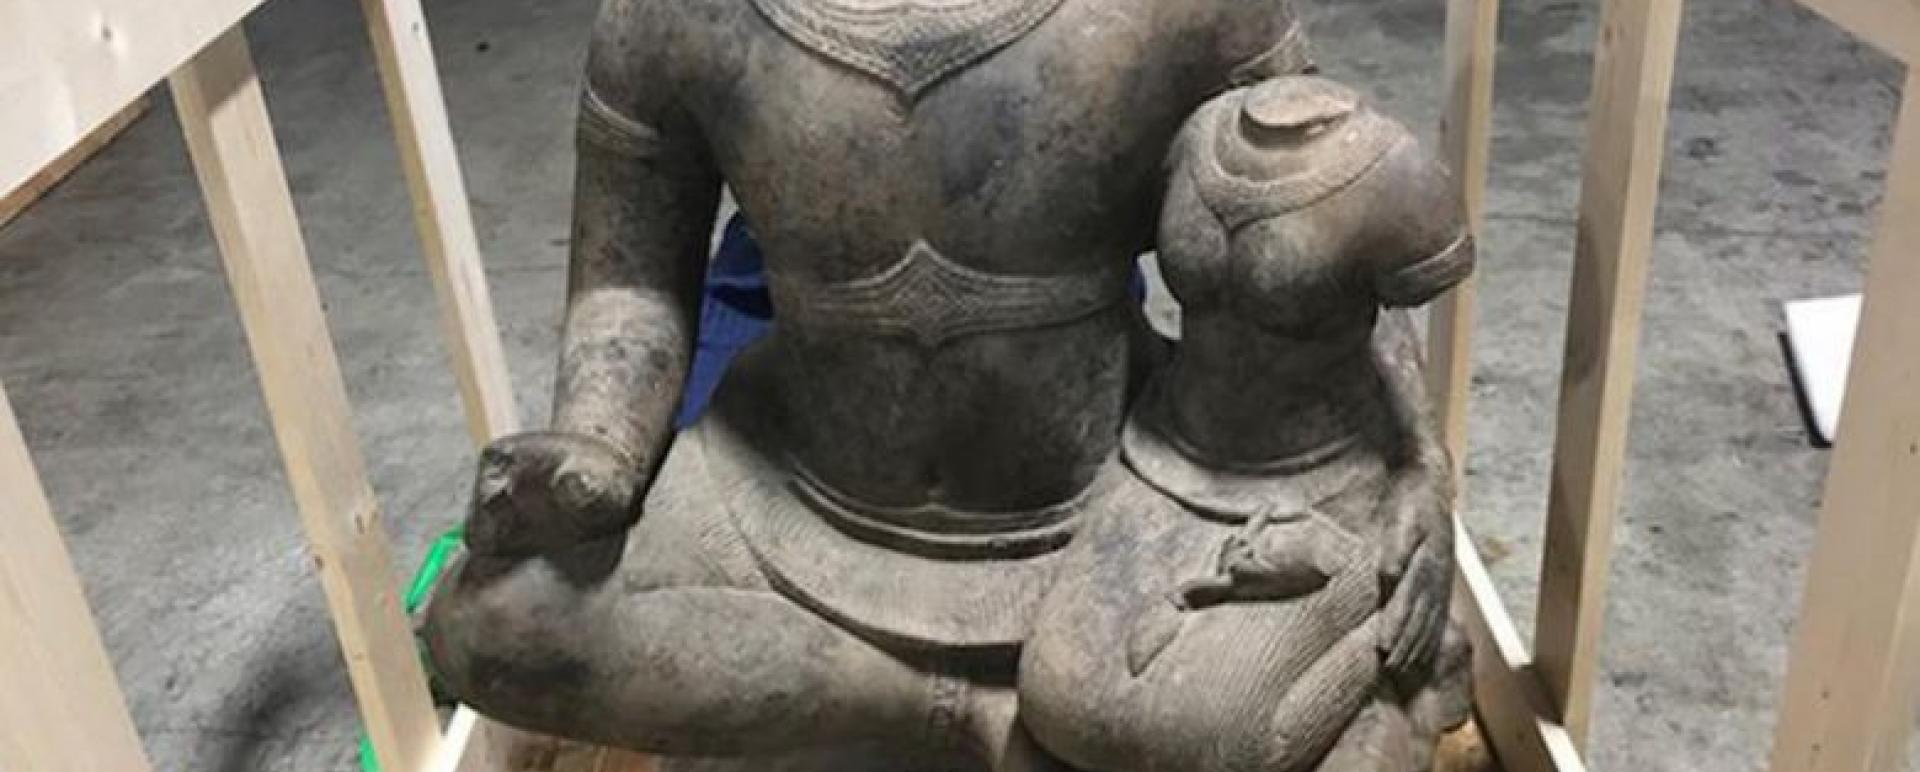 An ancient Cambodian artefact seized from a prominent San Francisco Bay Area auction house in the US awaits return to the Kingdom. US Immigration and Customs Enforcement